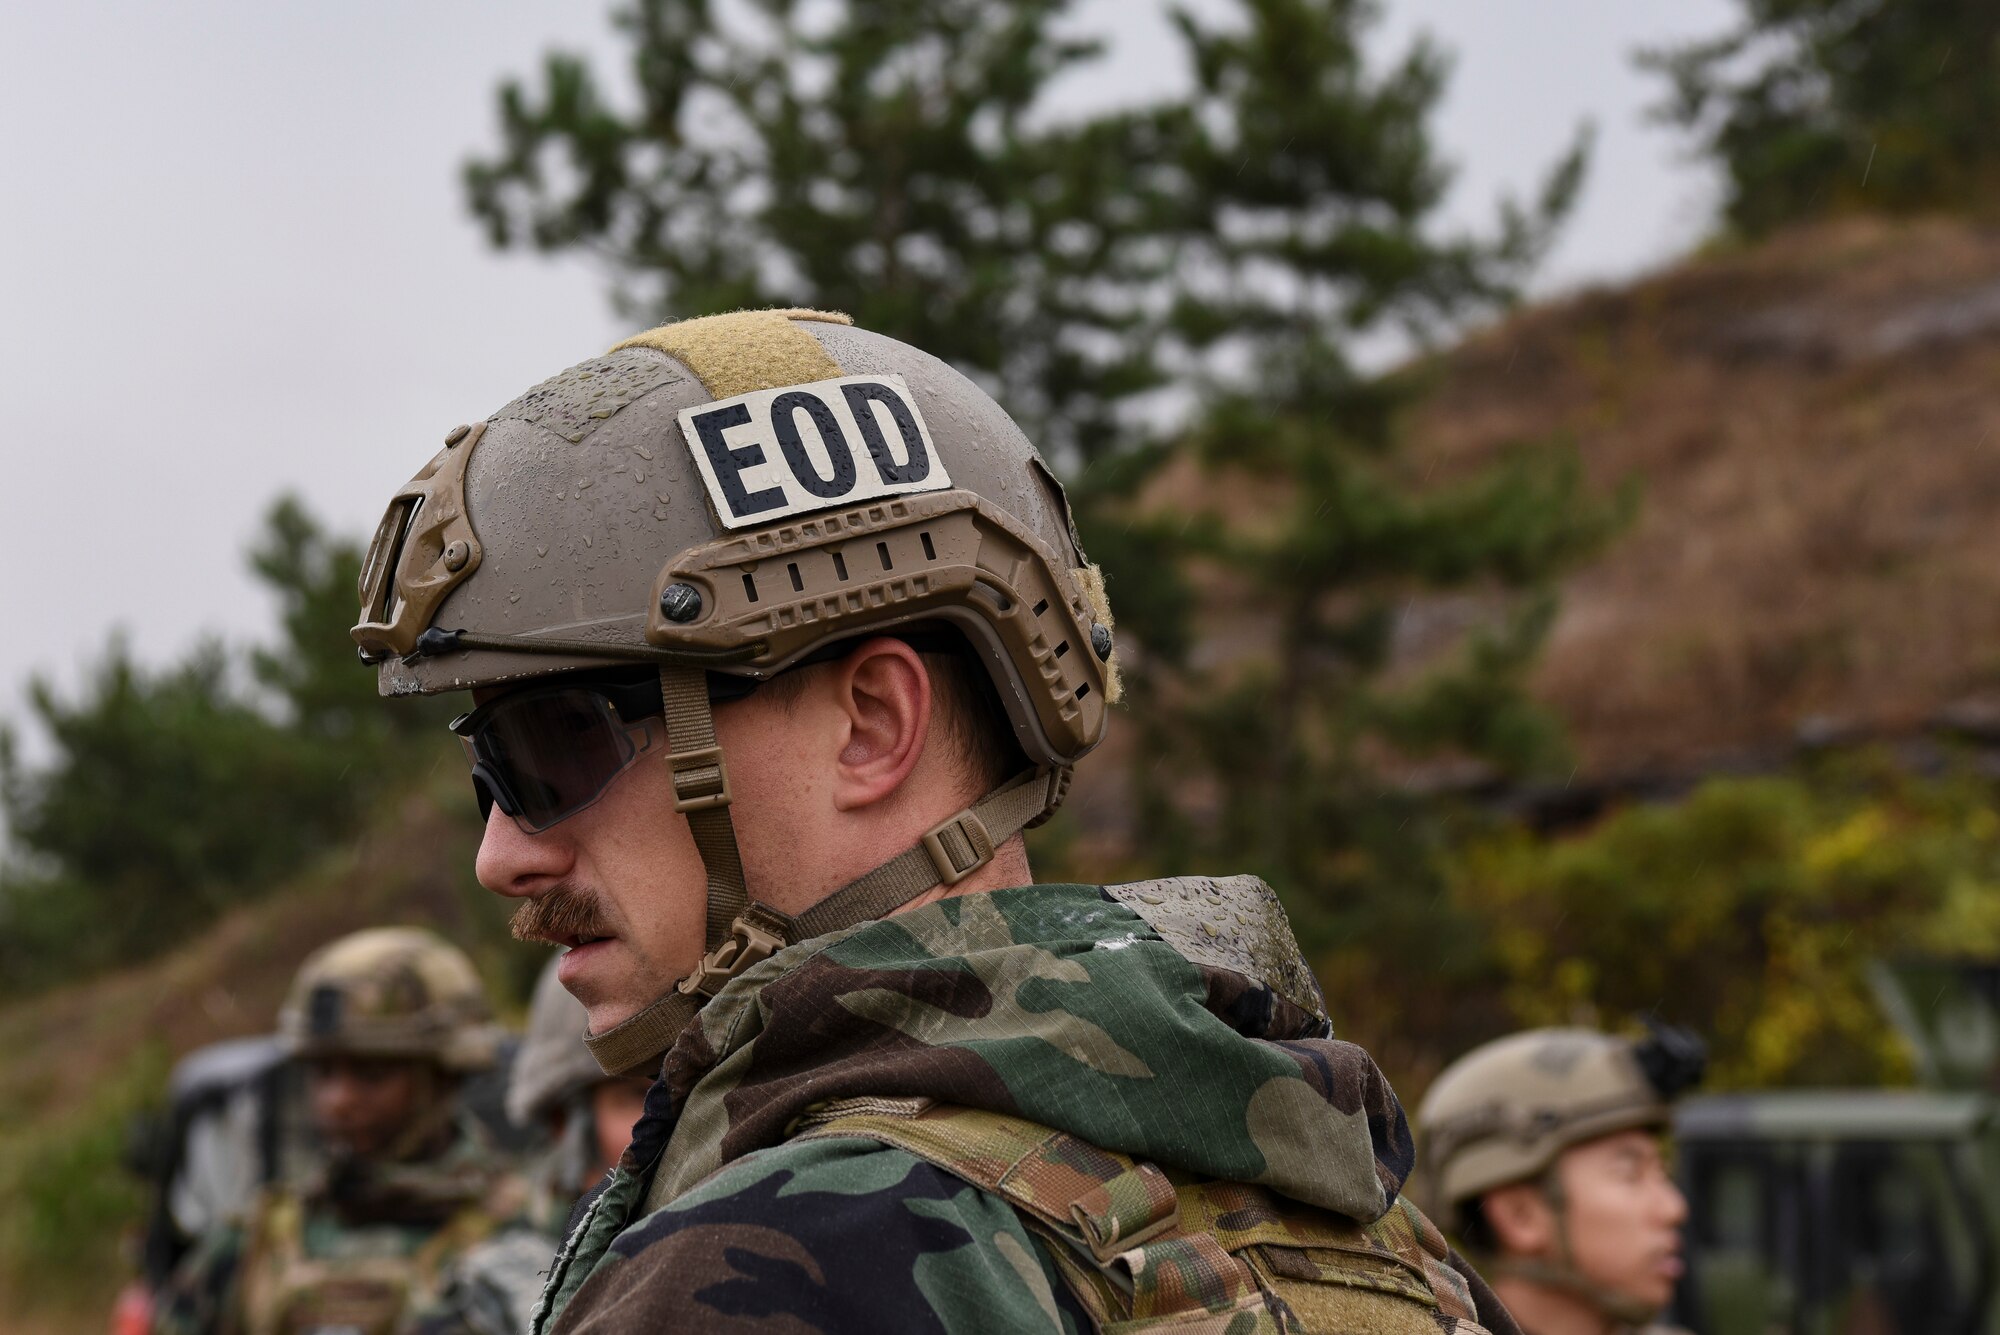 An Explosive Ordnance Disposal Airman from the 8th Civil Engineer Squadron participates in demolition training with an EOD team at Kunsan Air Base, Republic of Korea, Oct. 29, 2018. EOD members are trained to detect, disarm, detonate and dispose of explosive threats all over the world. During the training, EOD detonated multiple charges similar to the ones used to blast open a locked door.  (U.S. Air Force photo by Senior Airman Savannah Waters)